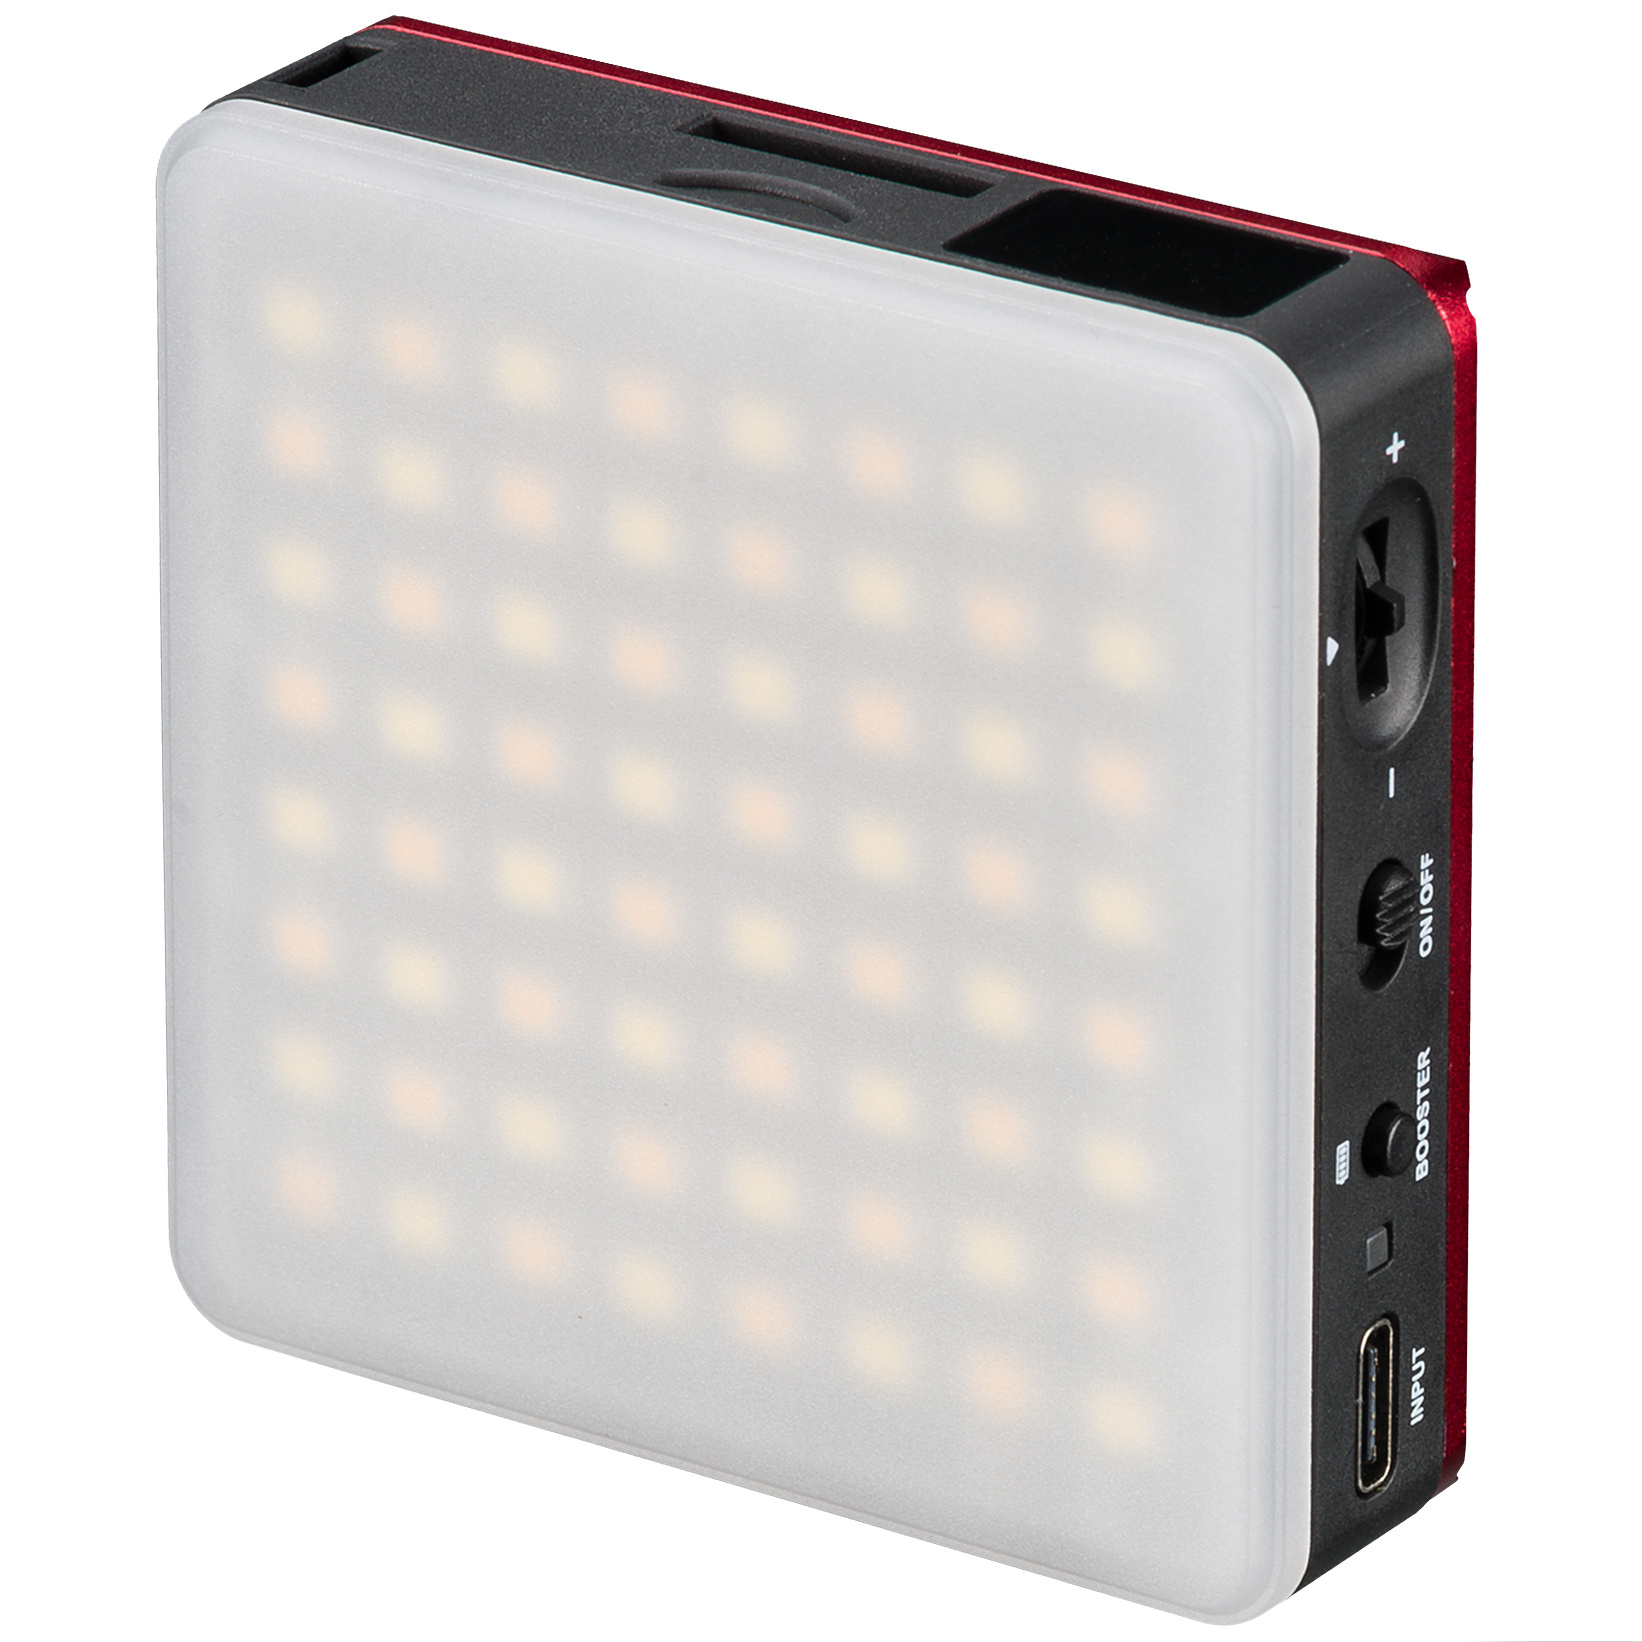 BRESSER Pocket LED 5 W Bi-Colour continuous Panel Light for on-the-go Use and Smartphone Photography